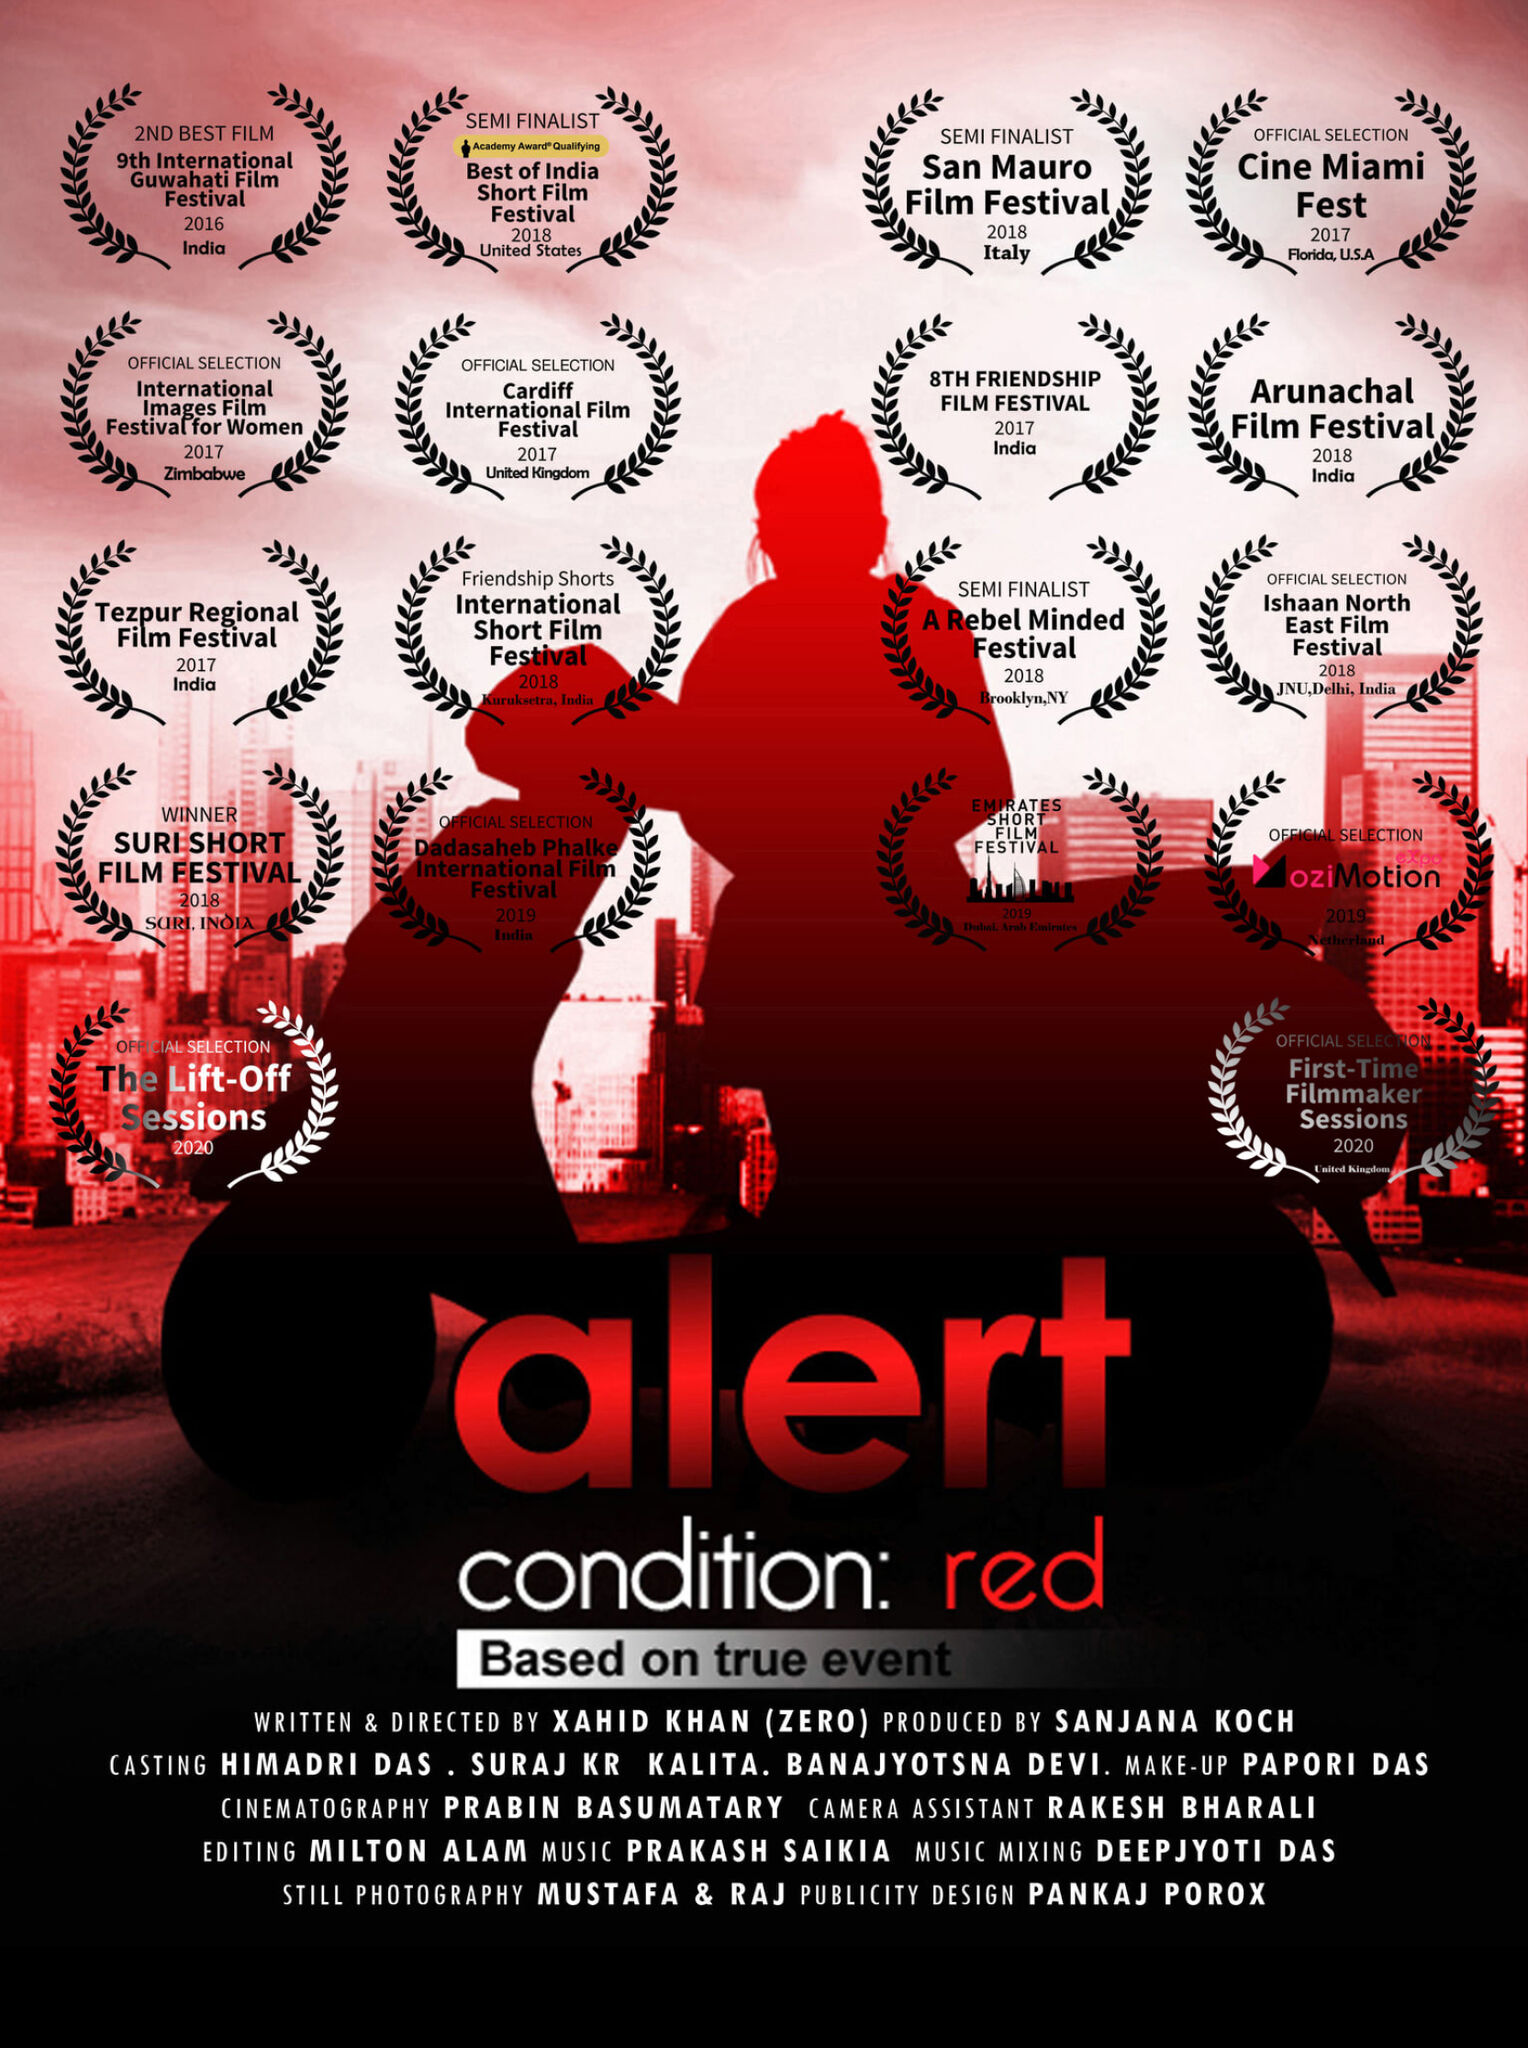 Alert: Condition - Red